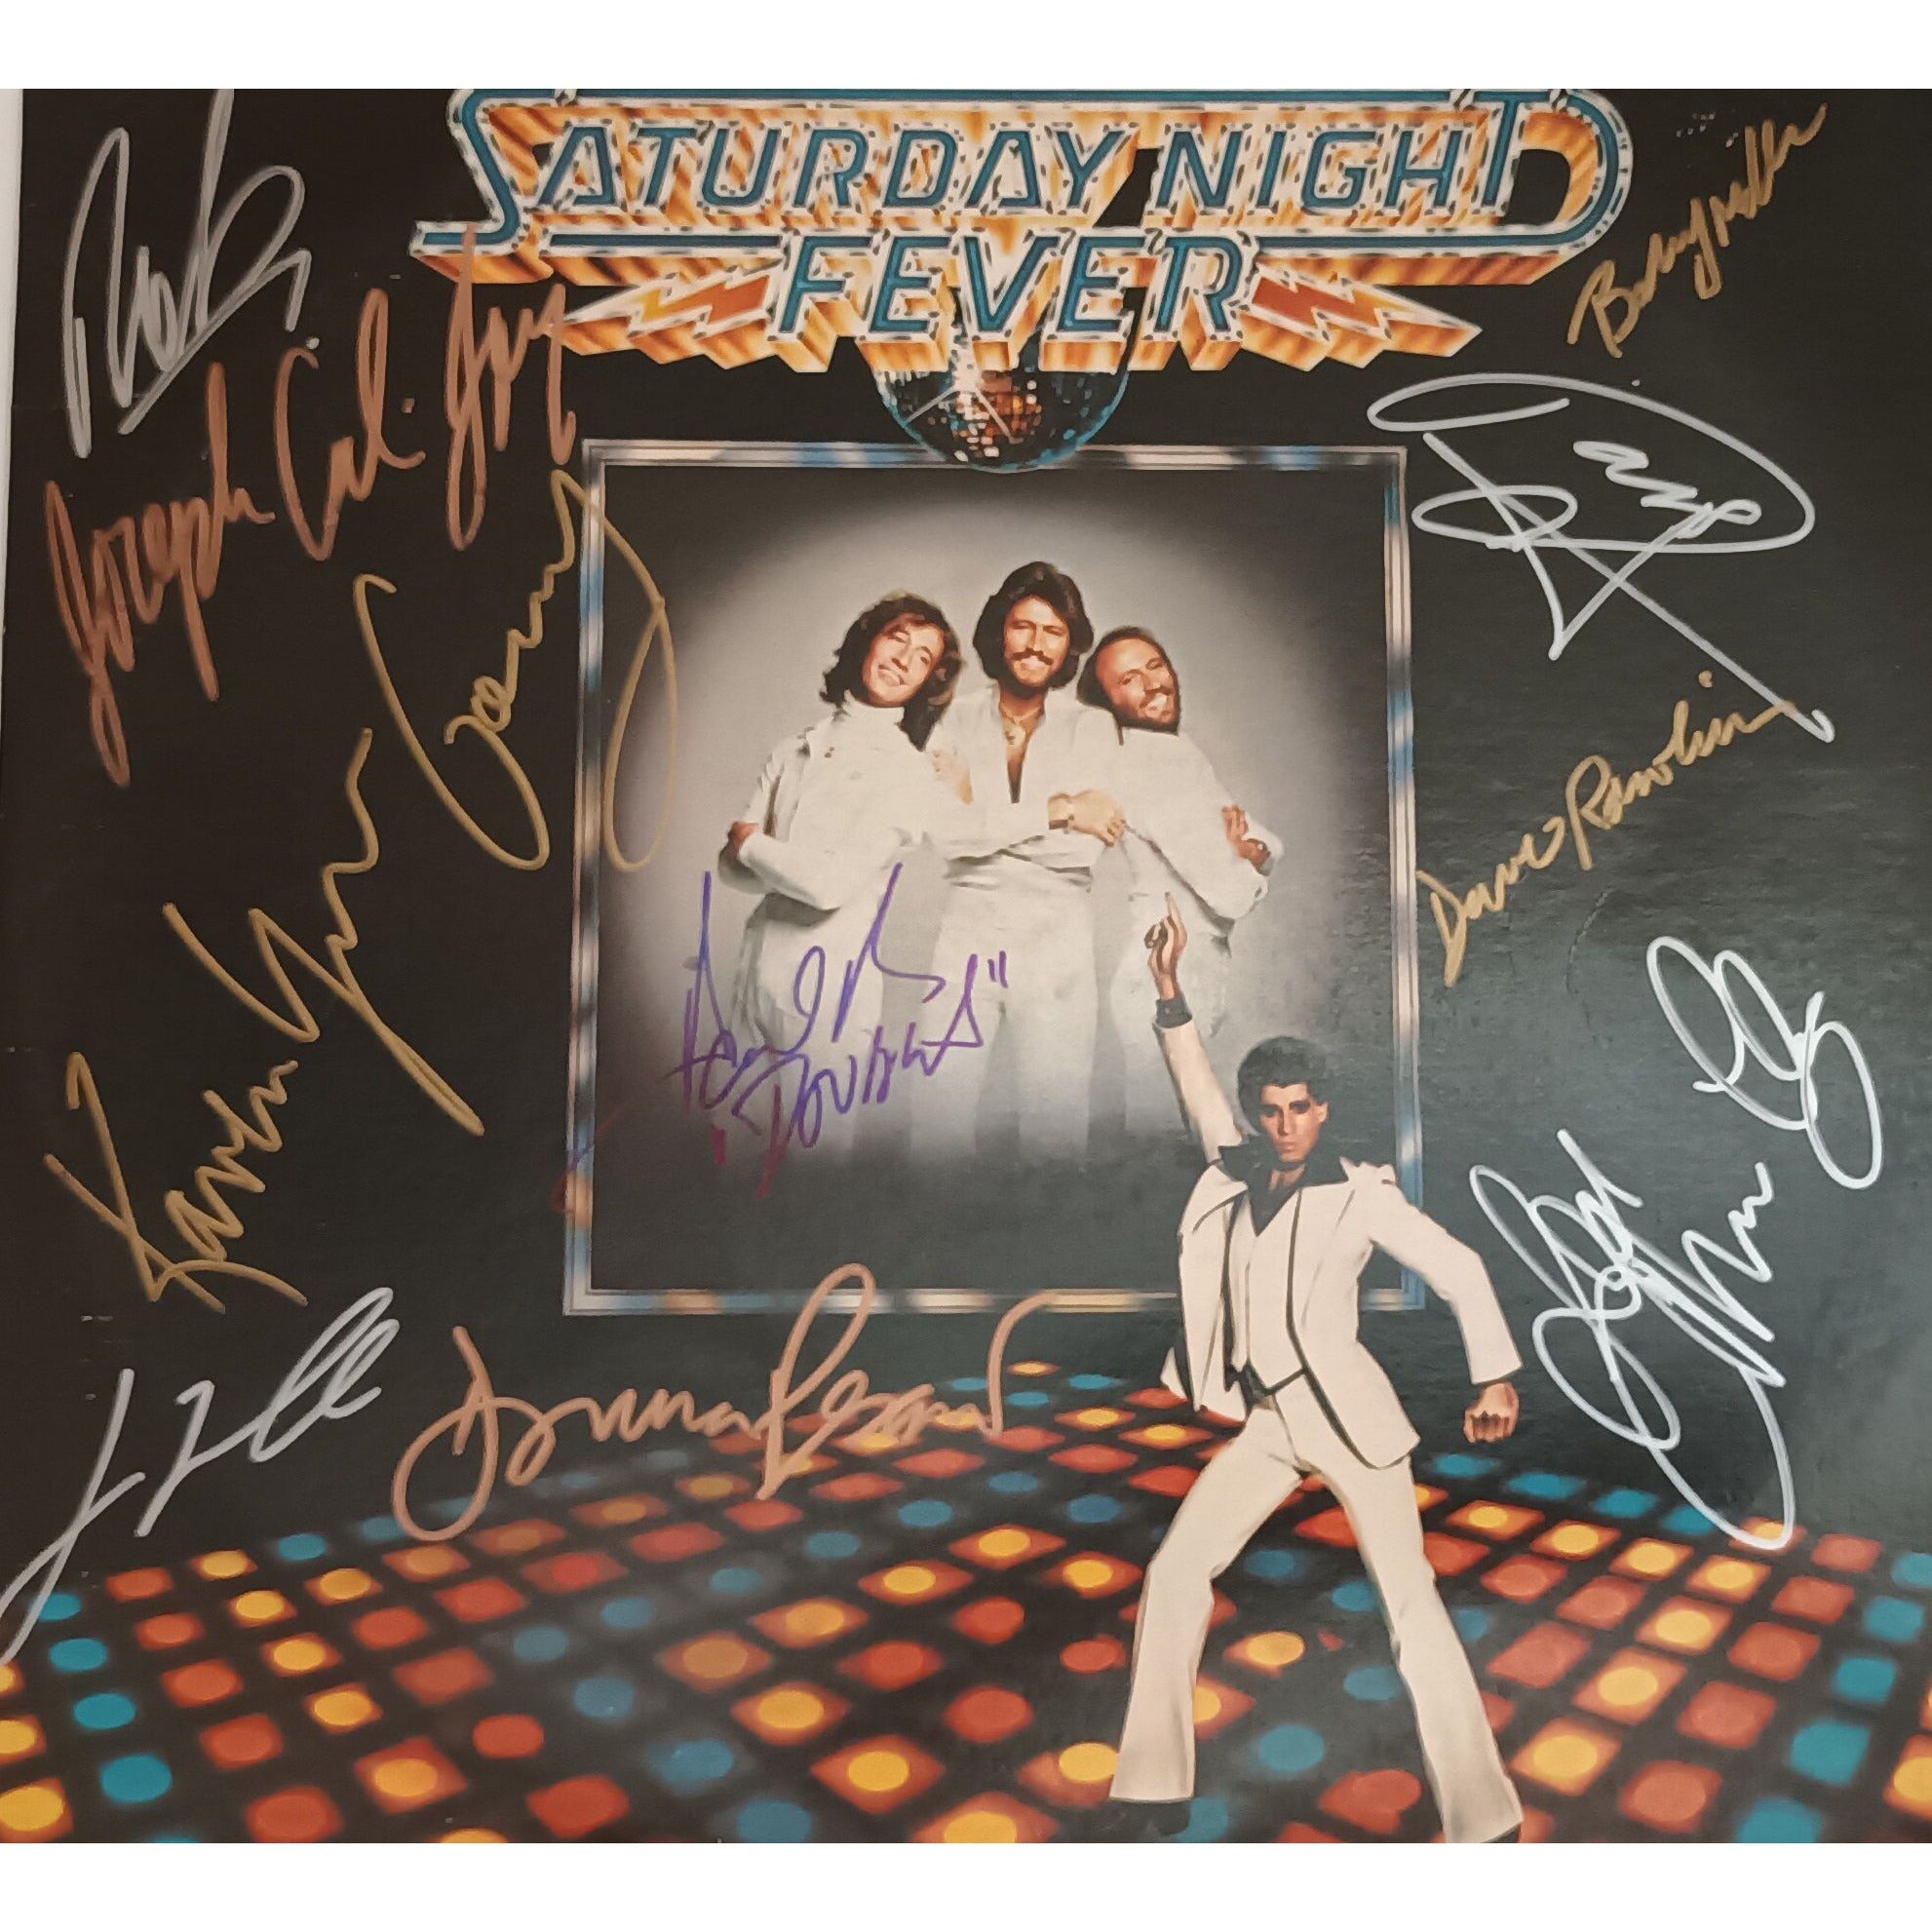 Saturday Night Fever LP signed by cast & Bee Gees